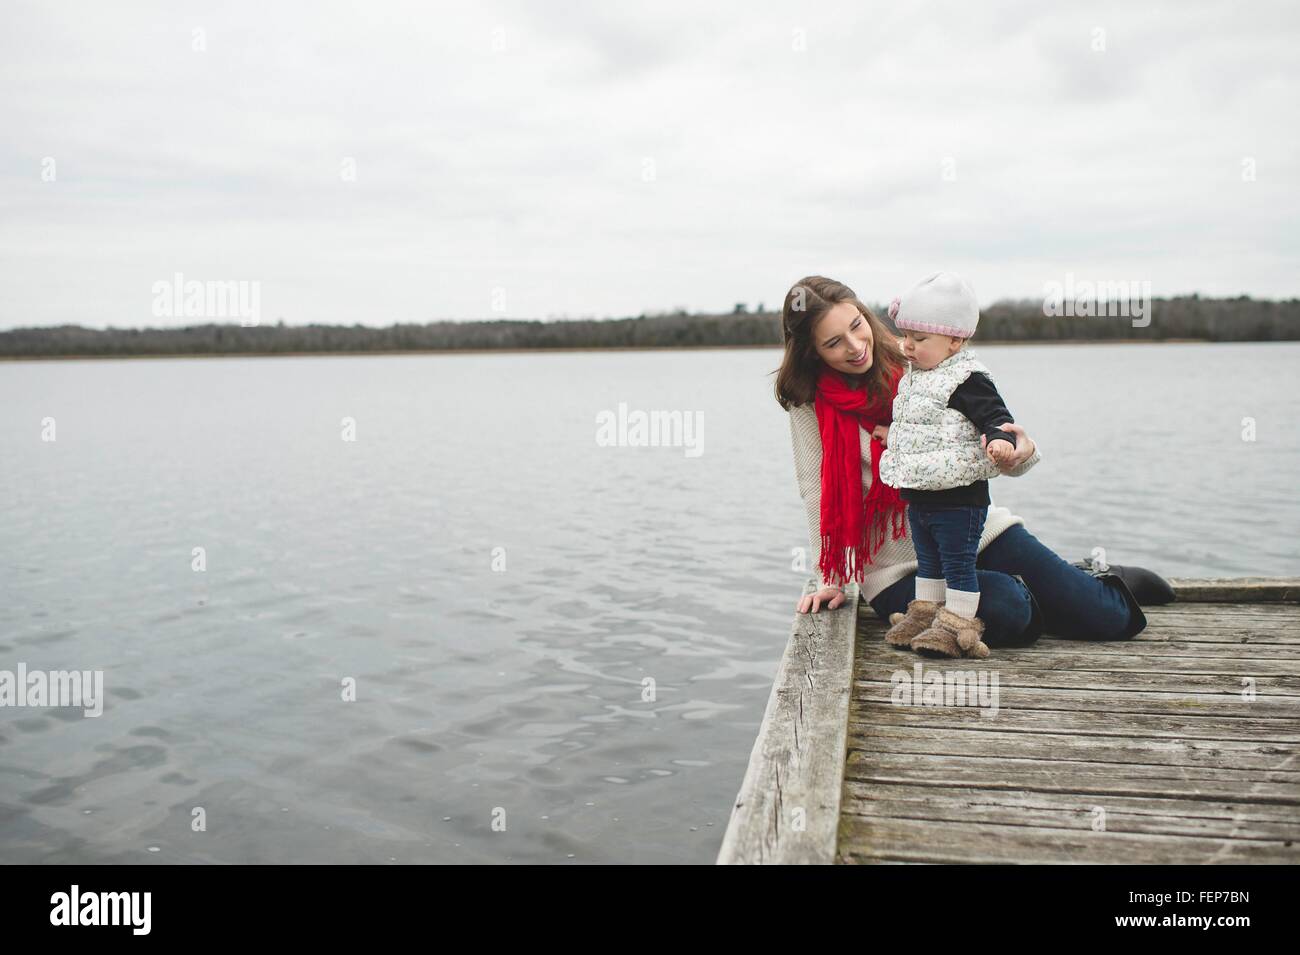 Mother and daughter on jetty, daughter looking at water Stock Photo